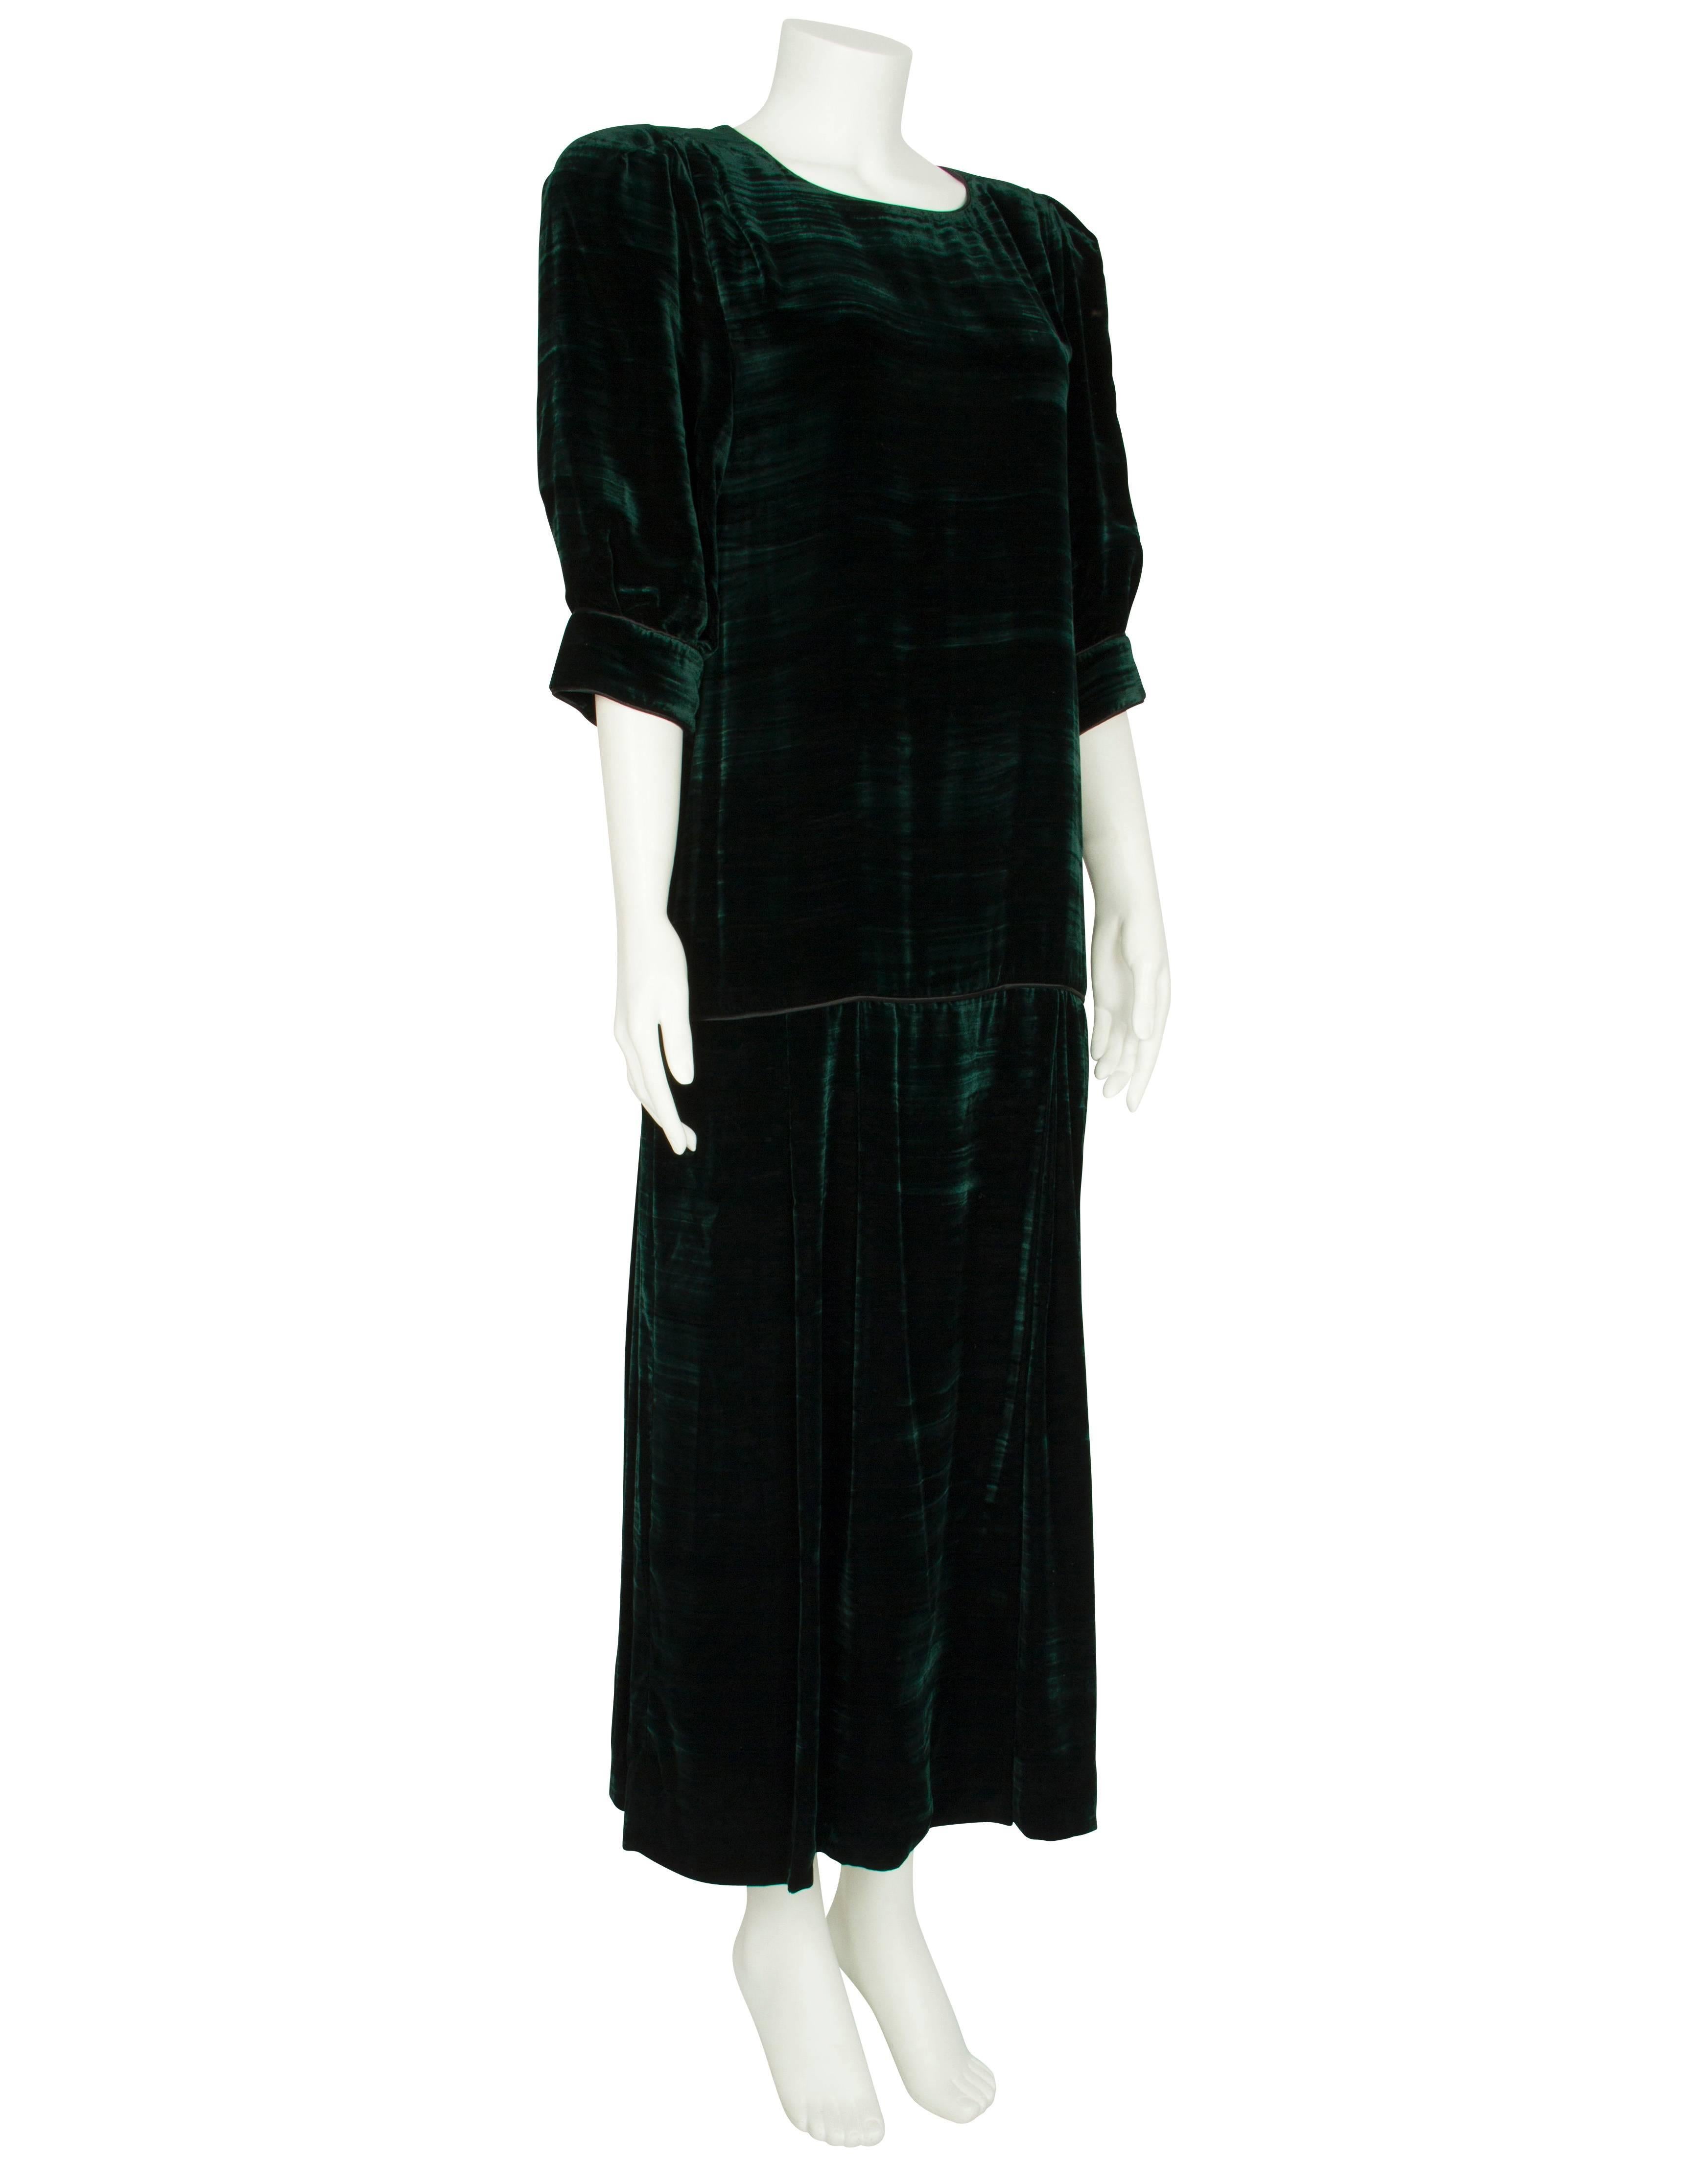 A luxurious 1980s Anouska Hempel deep forest green crushed velvet maxi dress with puffed sleeves and an elegant velvet sheen. The soft, heavy dress is cut in a straight shift shape with a dropped waist marked by black silk piping, before gently